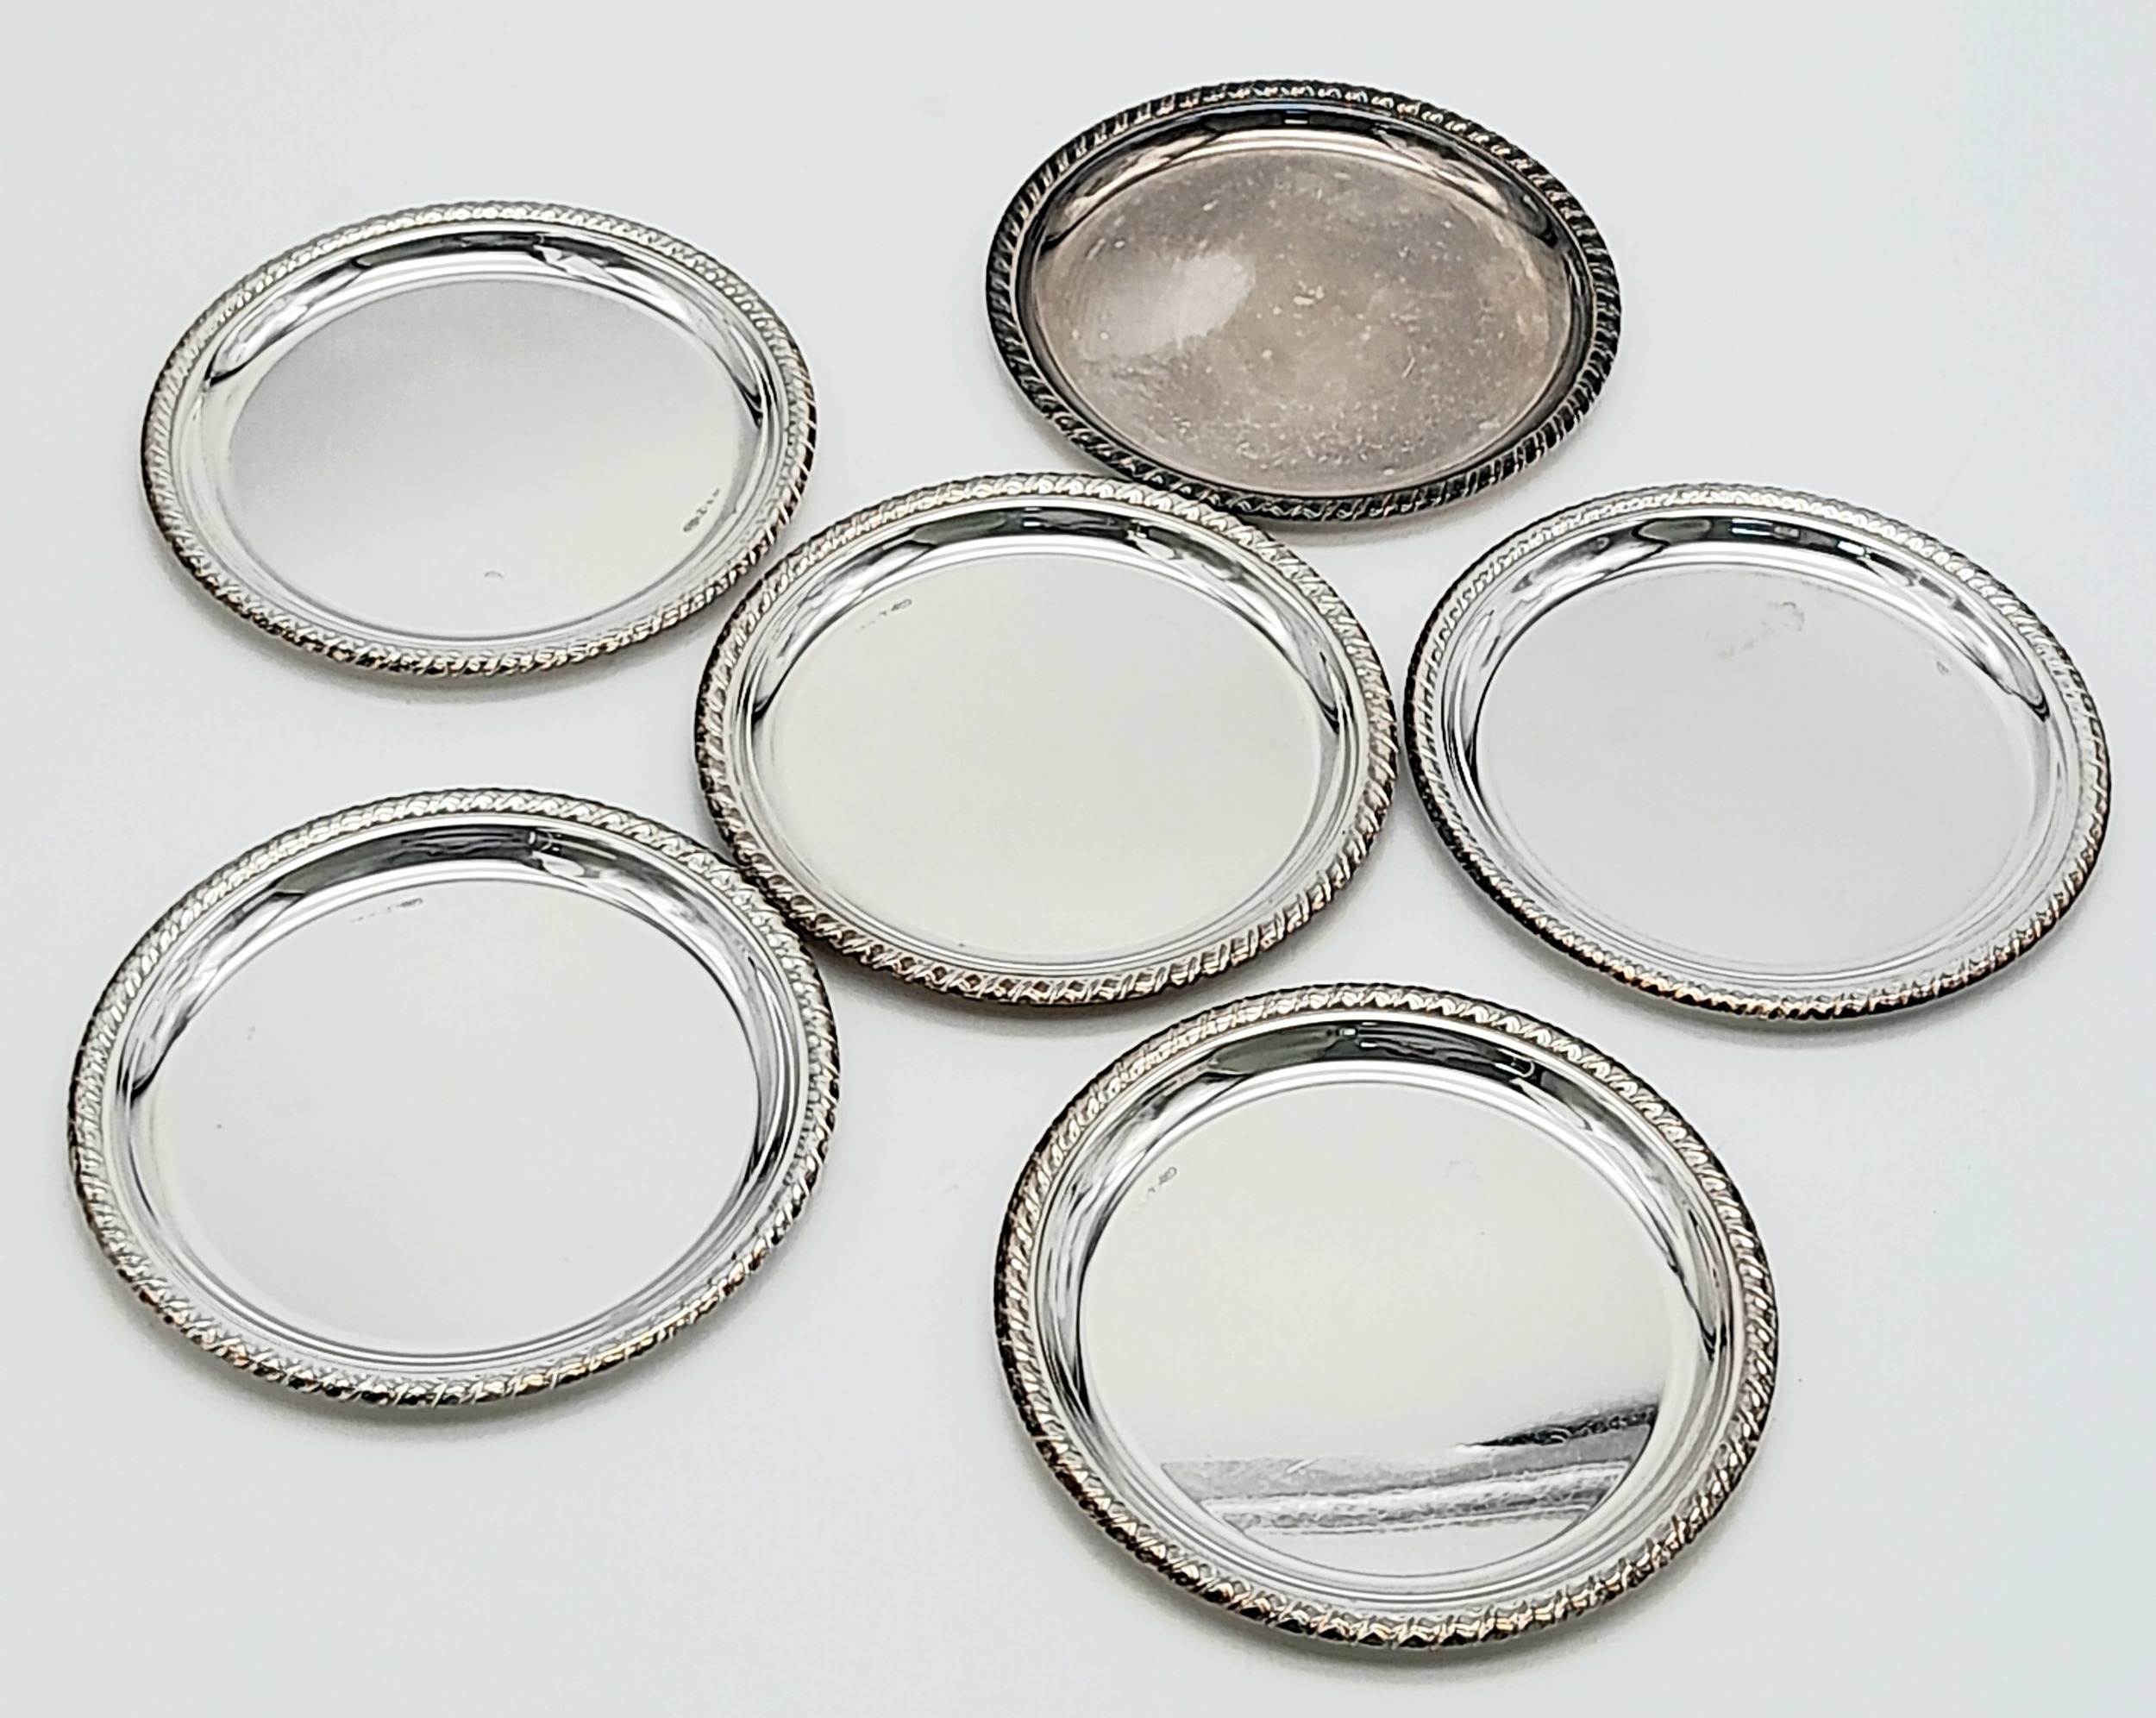 A SET OF SIX SOLID SILVER COASTERS IN 800 SILVER , NICELY EDGED AND BEING 10cms in DIAMETER . 316gms - Image 4 of 5